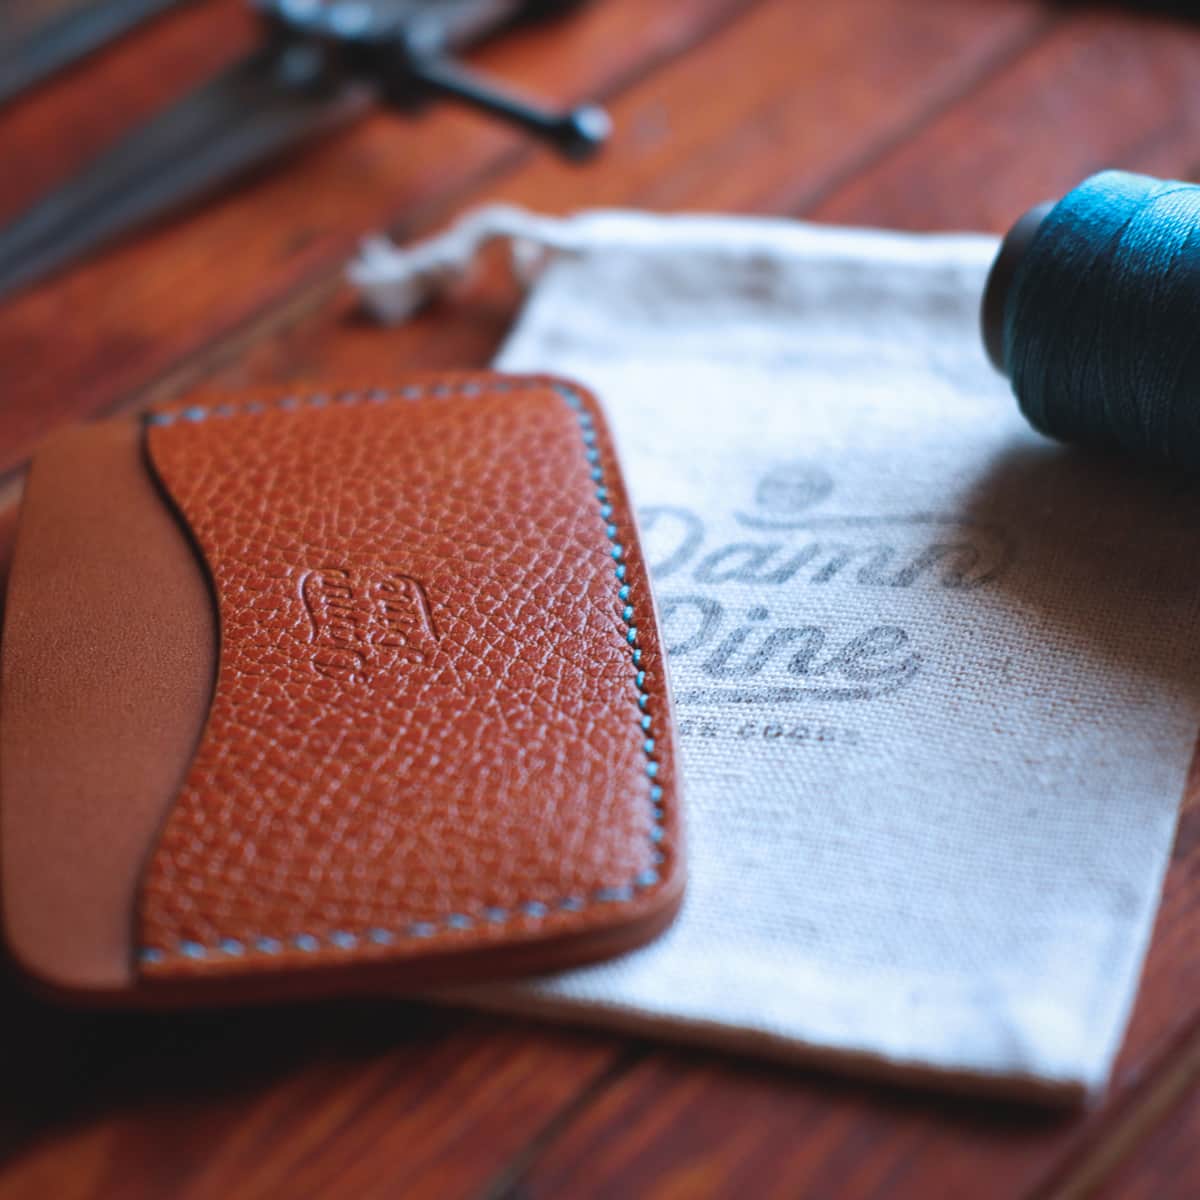 Closeup of The Arc Card Holder in Ruggine Koala and Cognac Tartufo full grain vegetable tanned leather